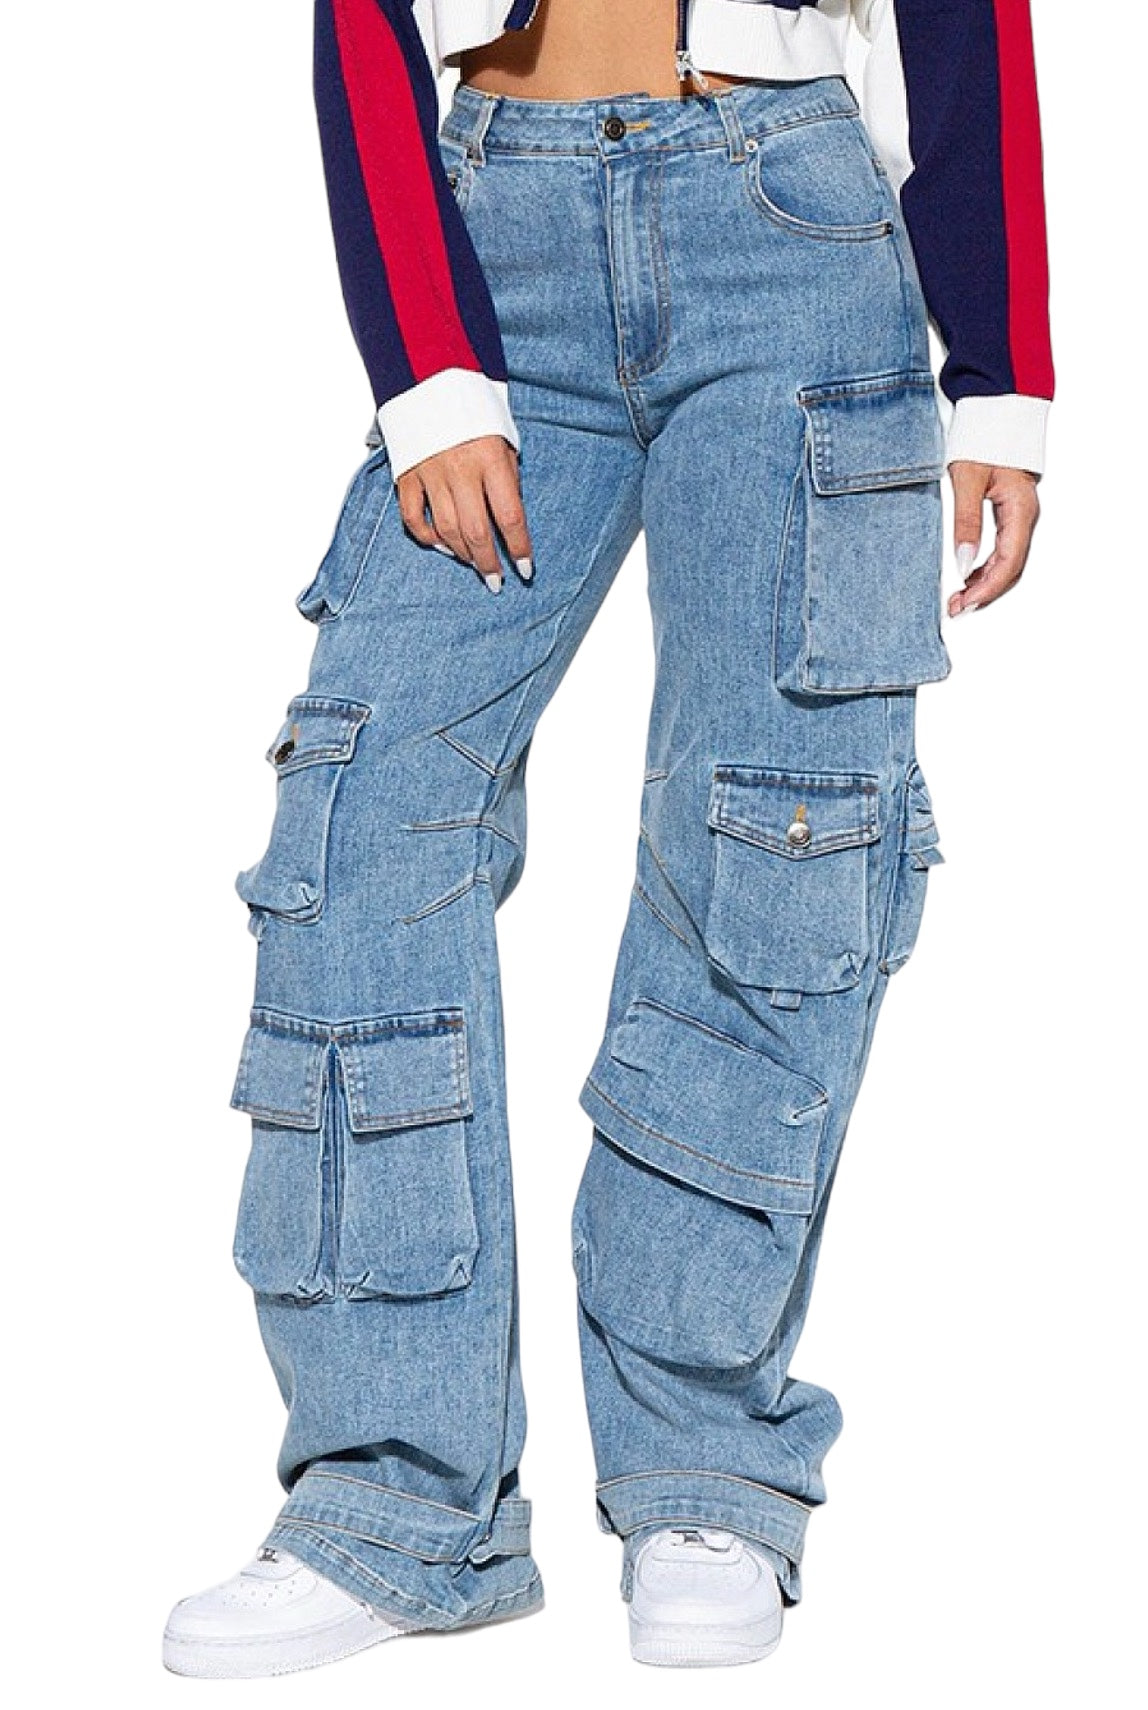 Vintage High Waist Denim Cargo Jeans With Multi Pockets For Women  Streetwear Fashion Cargo Trousers Primark With Baggy Style Style #230803  From Cong04, $46.84 | DHgate.Com